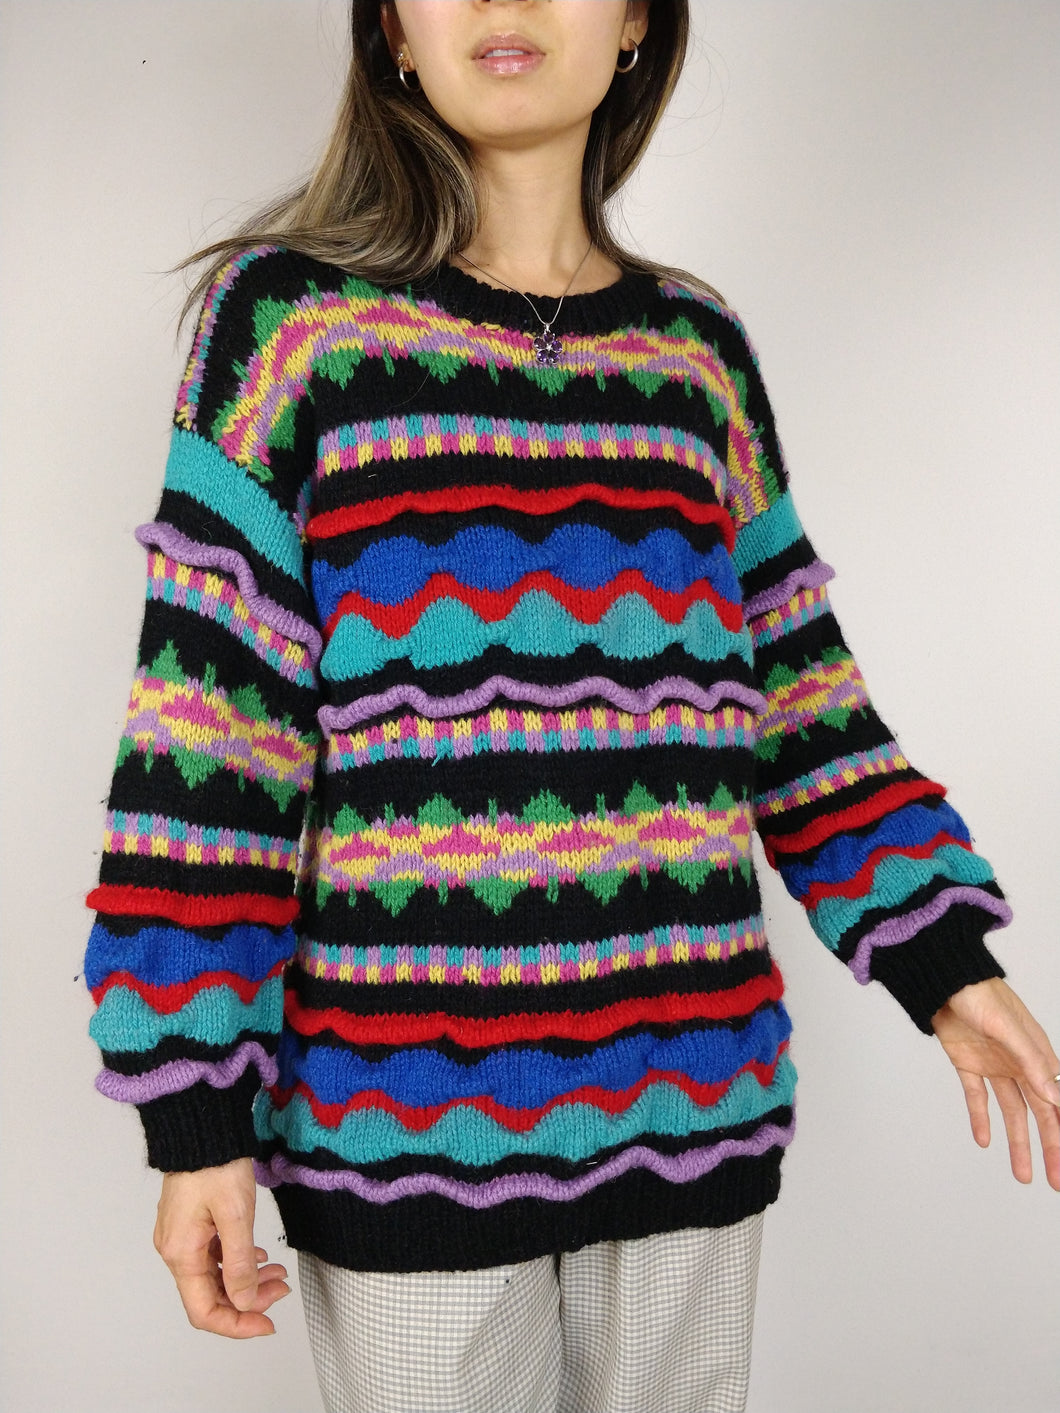 The Crazy Black Knit | Vintage knit sweater pullover structural pattern jumper black red blue purple winter S-M